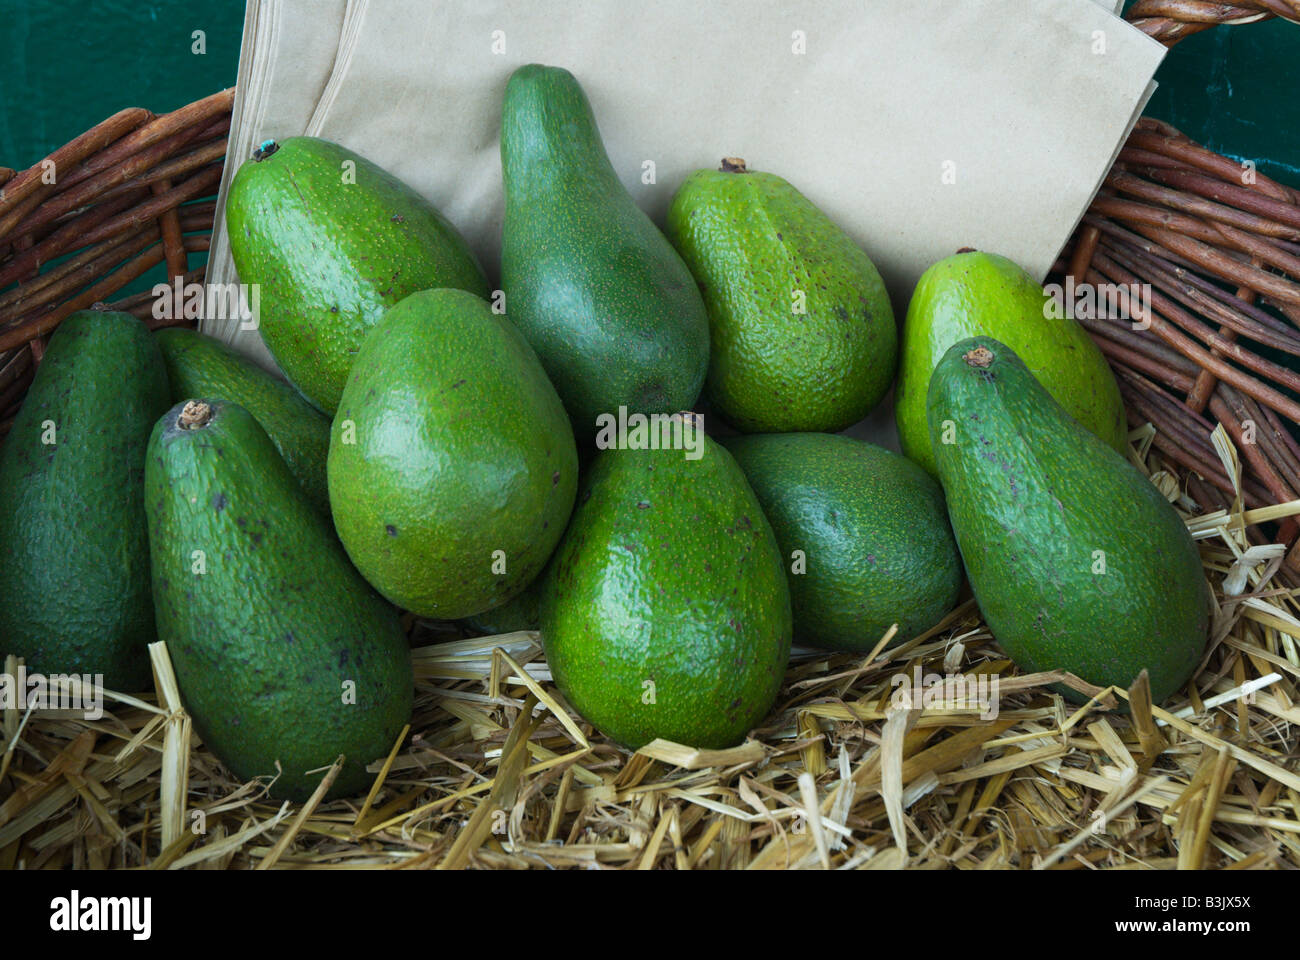 https://c8.alamy.com/comp/B3JX5X/smooth-green-skinned-fuerte-avocados-on-a-bed-of-straw-in-a-woven-B3JX5X.jpg